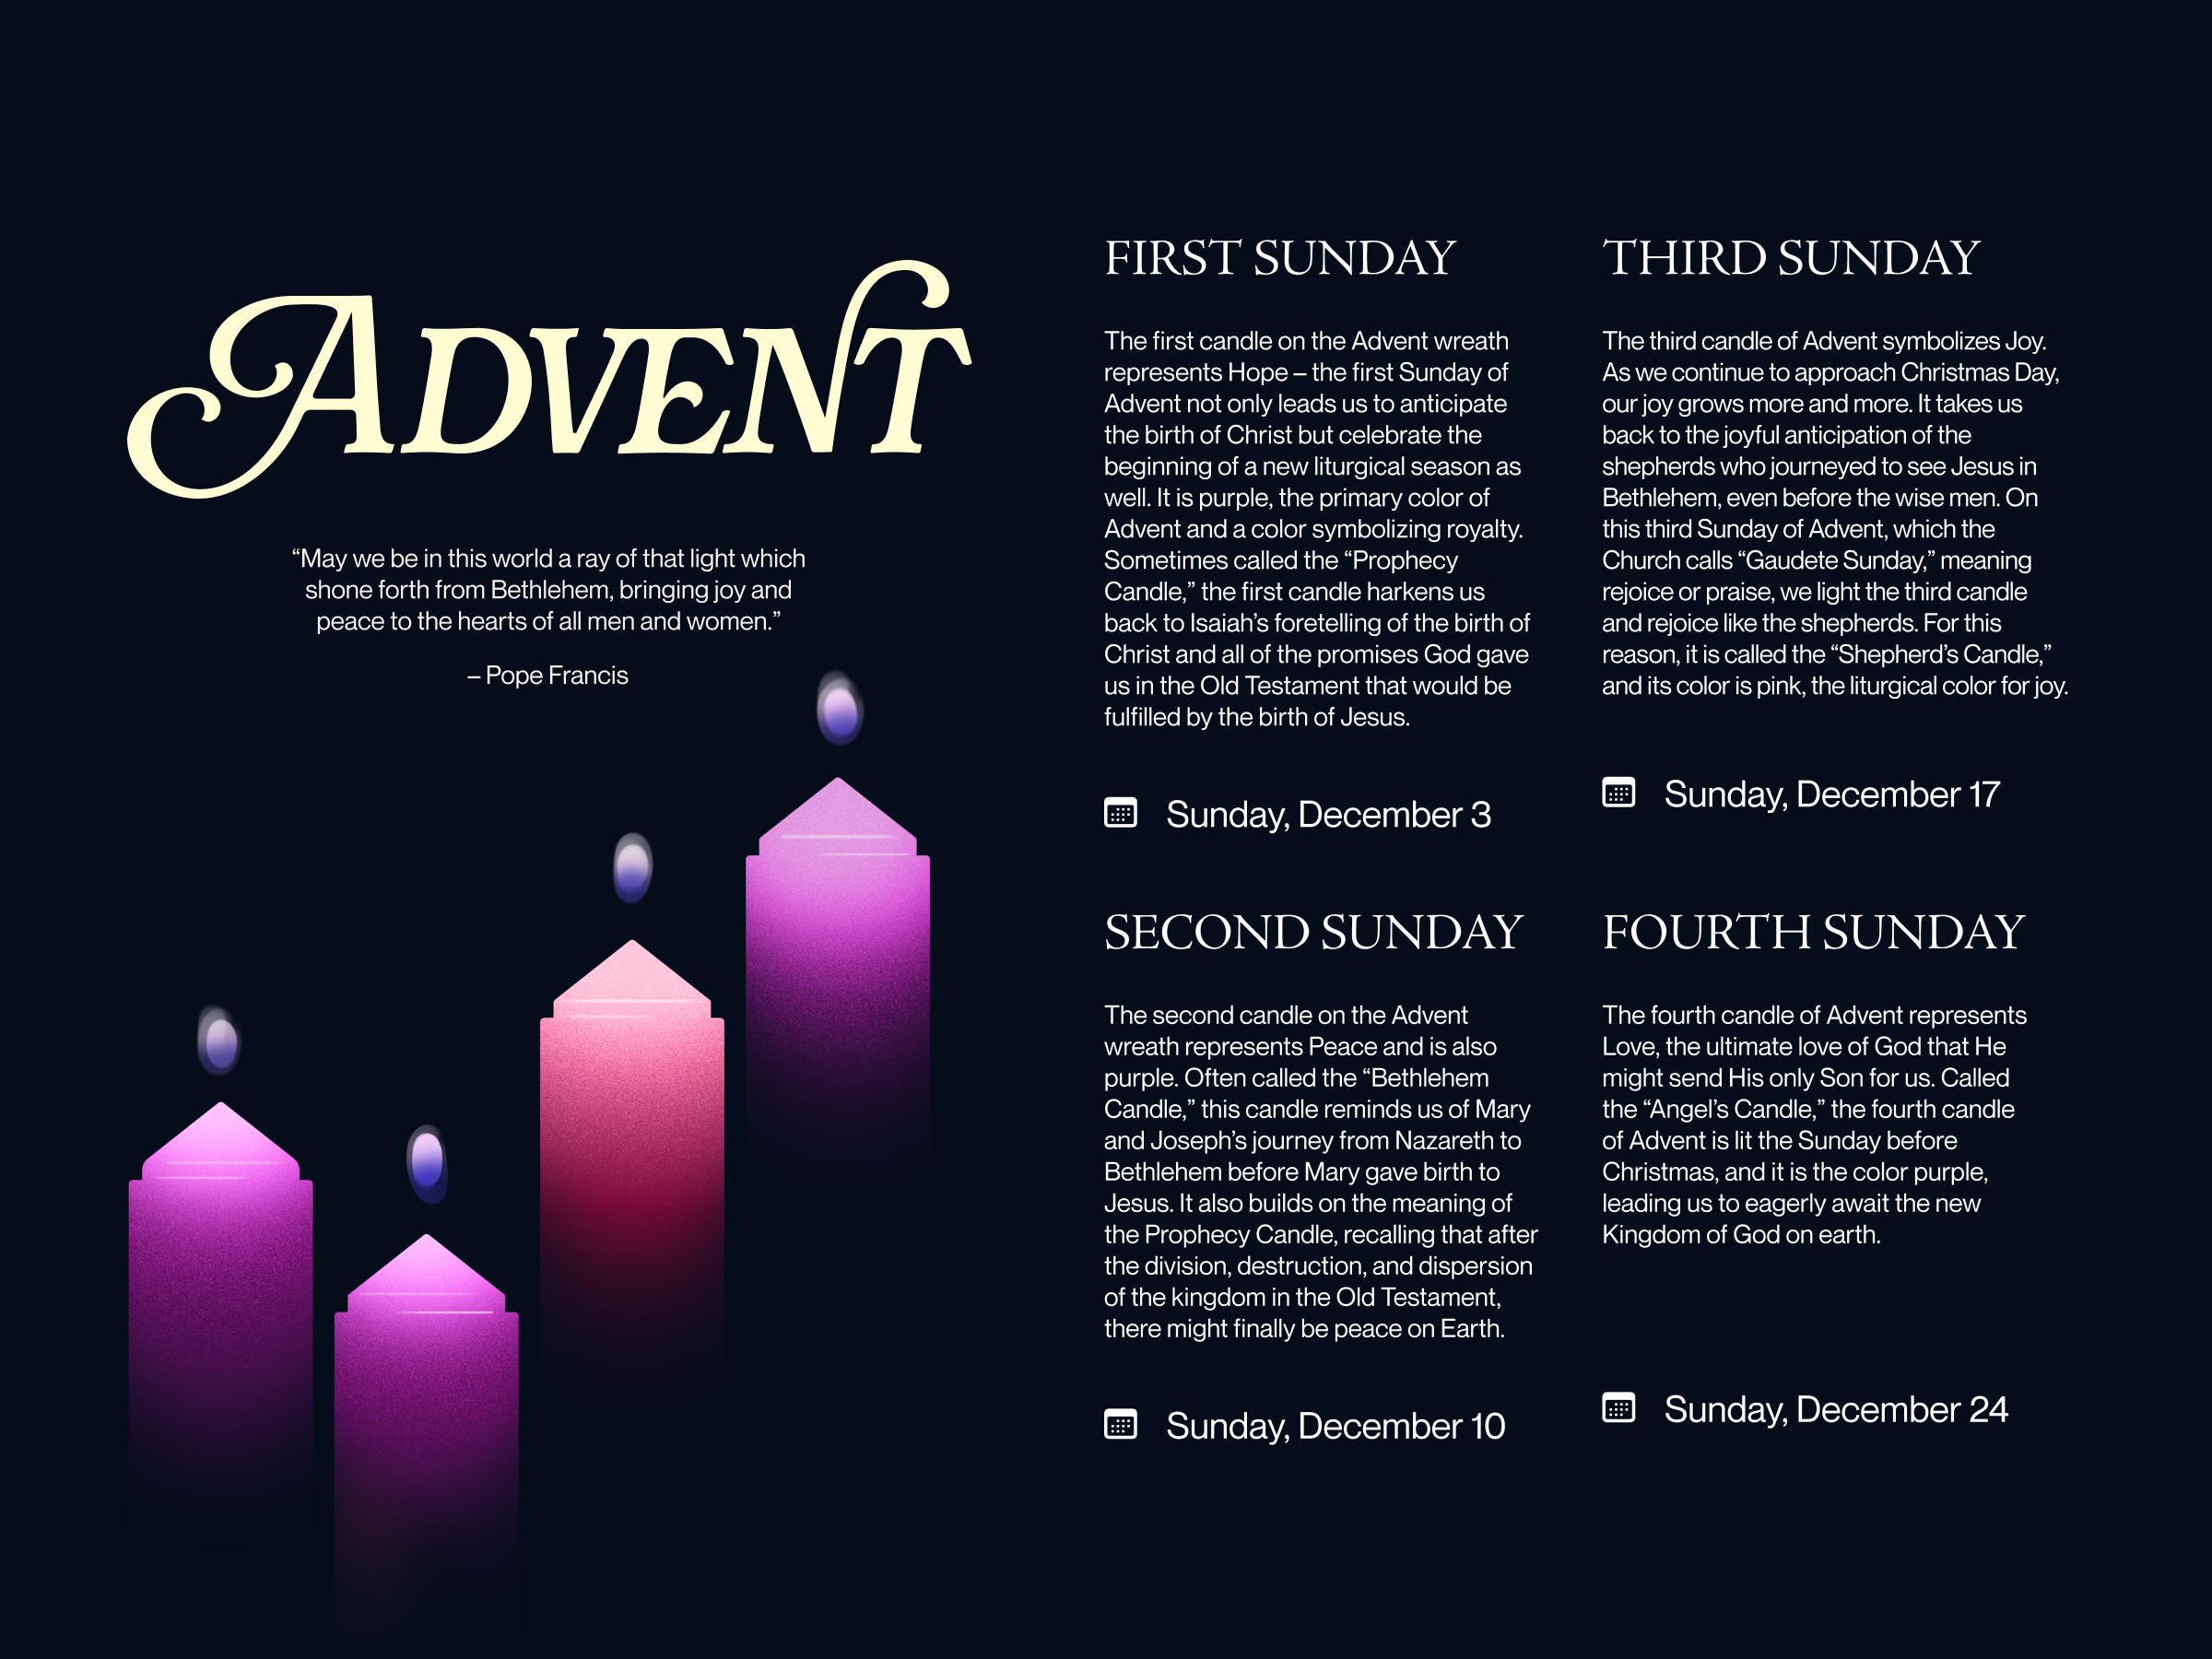 A graphic showing four advent candles with text describing the meaning of each candle